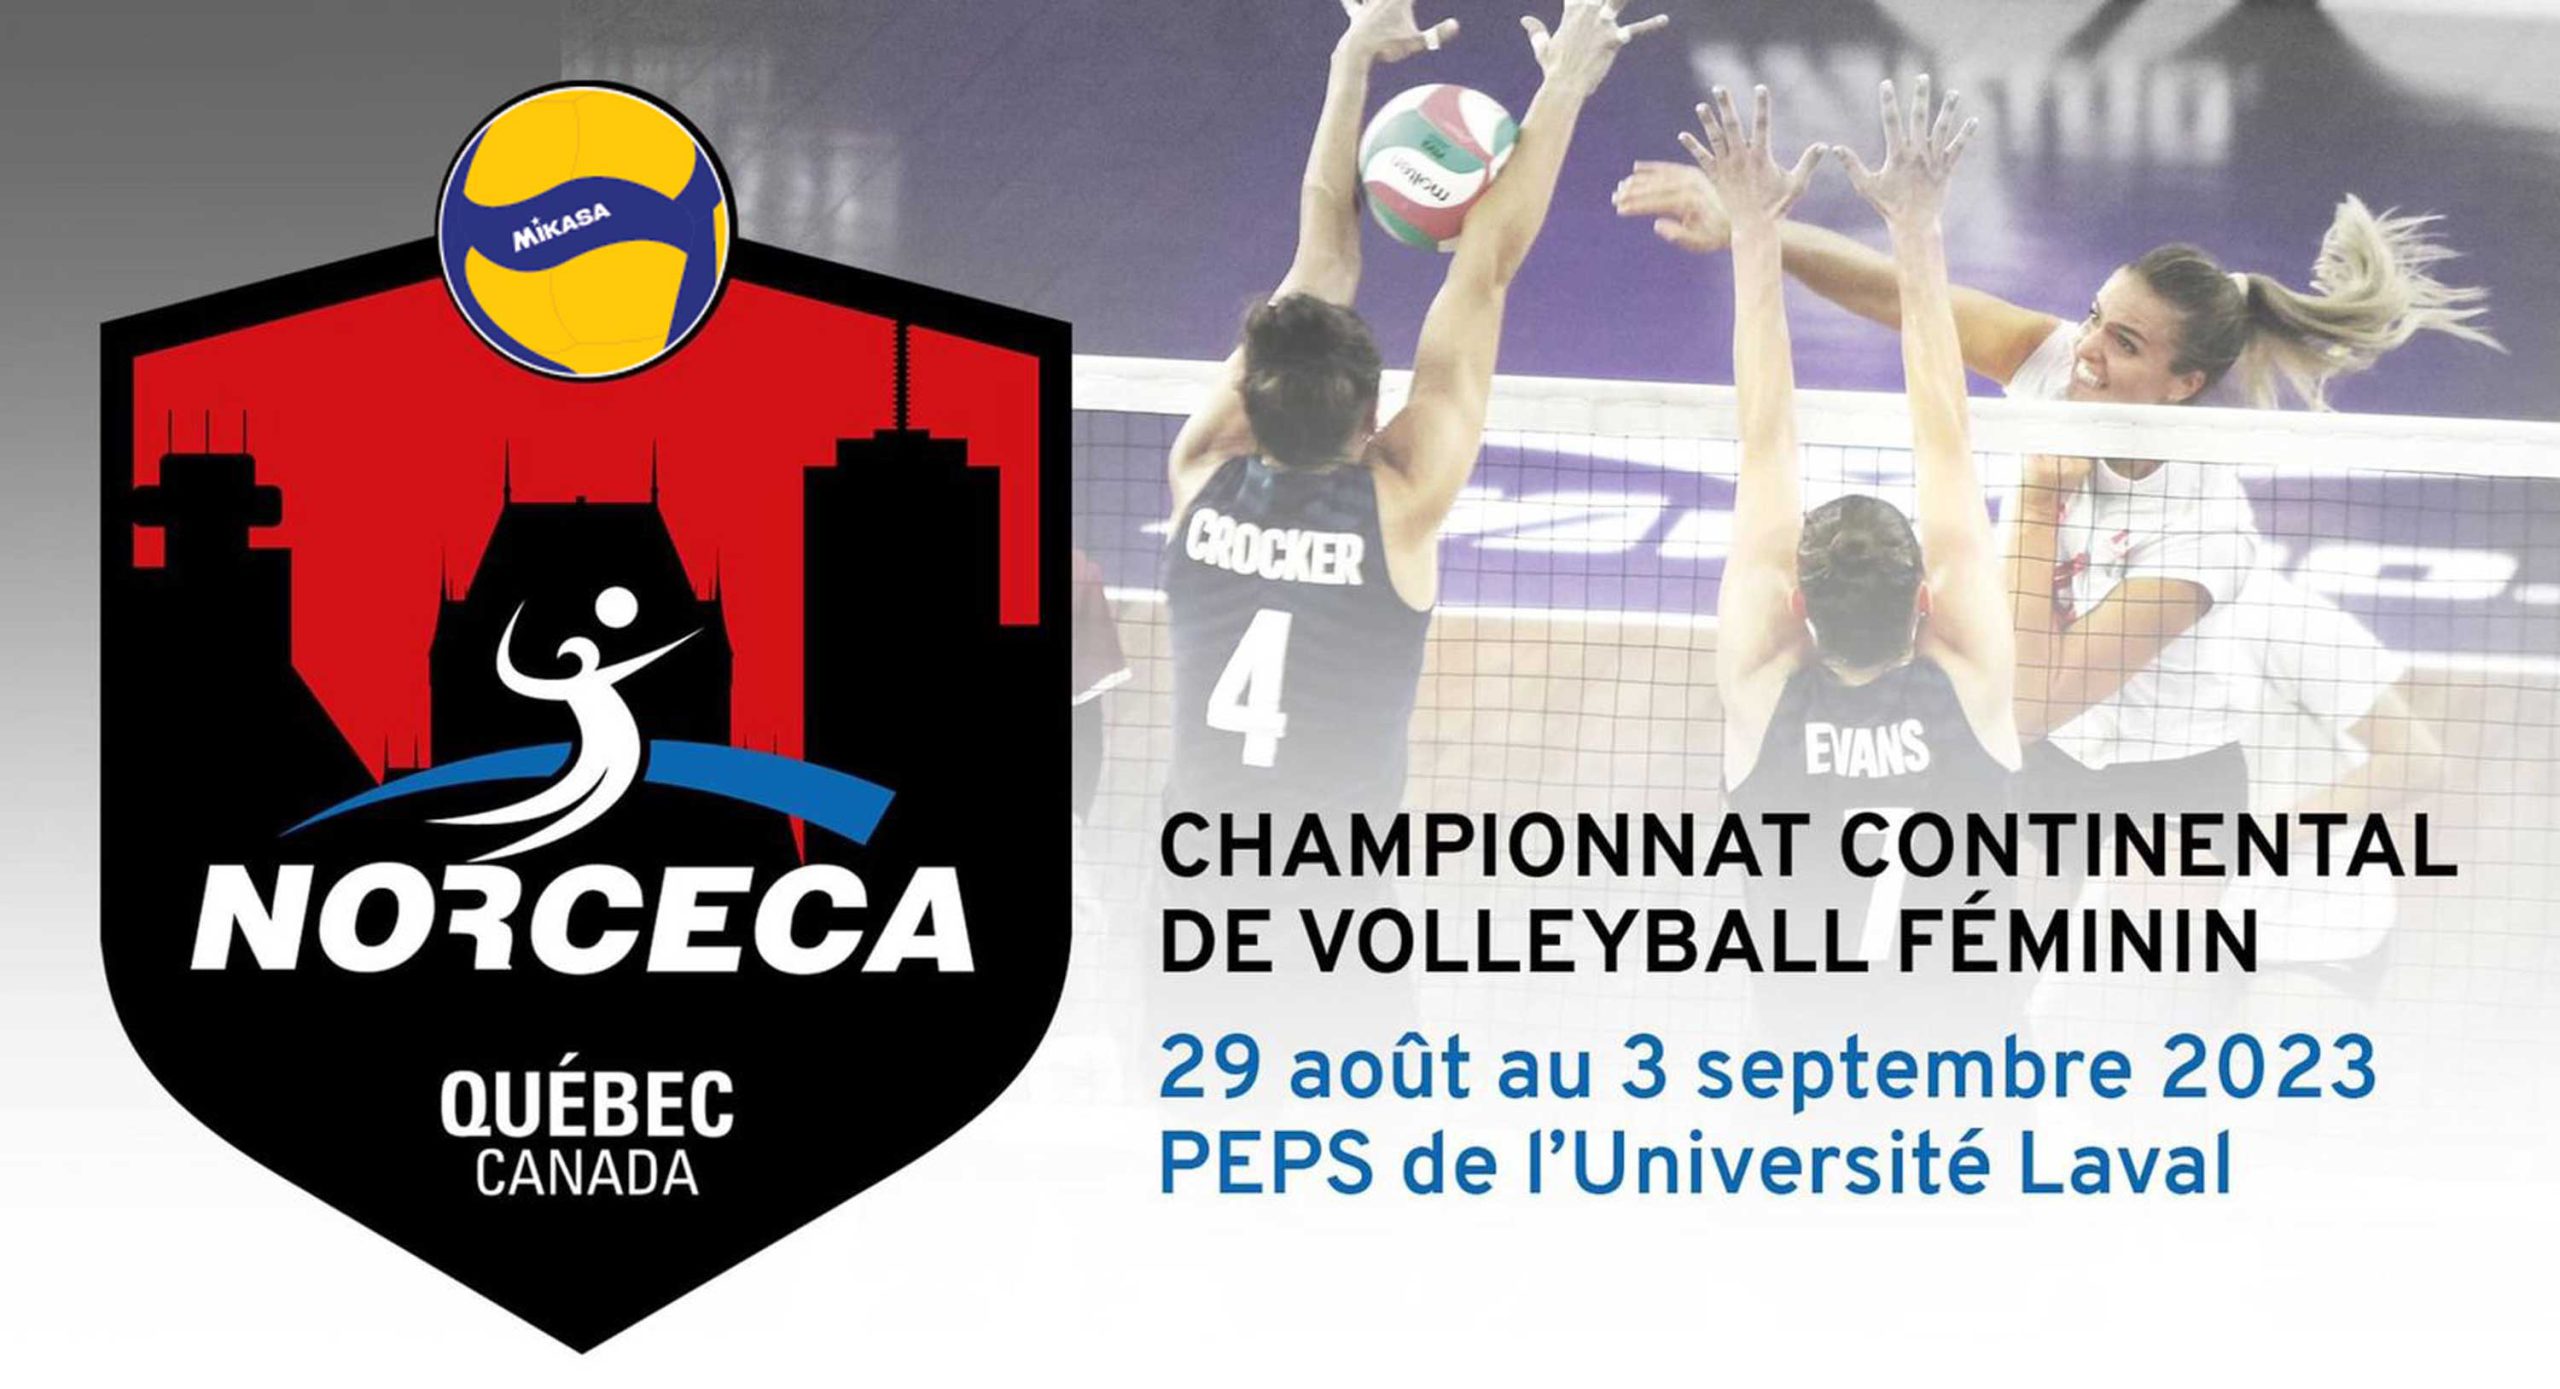 NORCECA Women’s Continental Championship to take place in Quebec